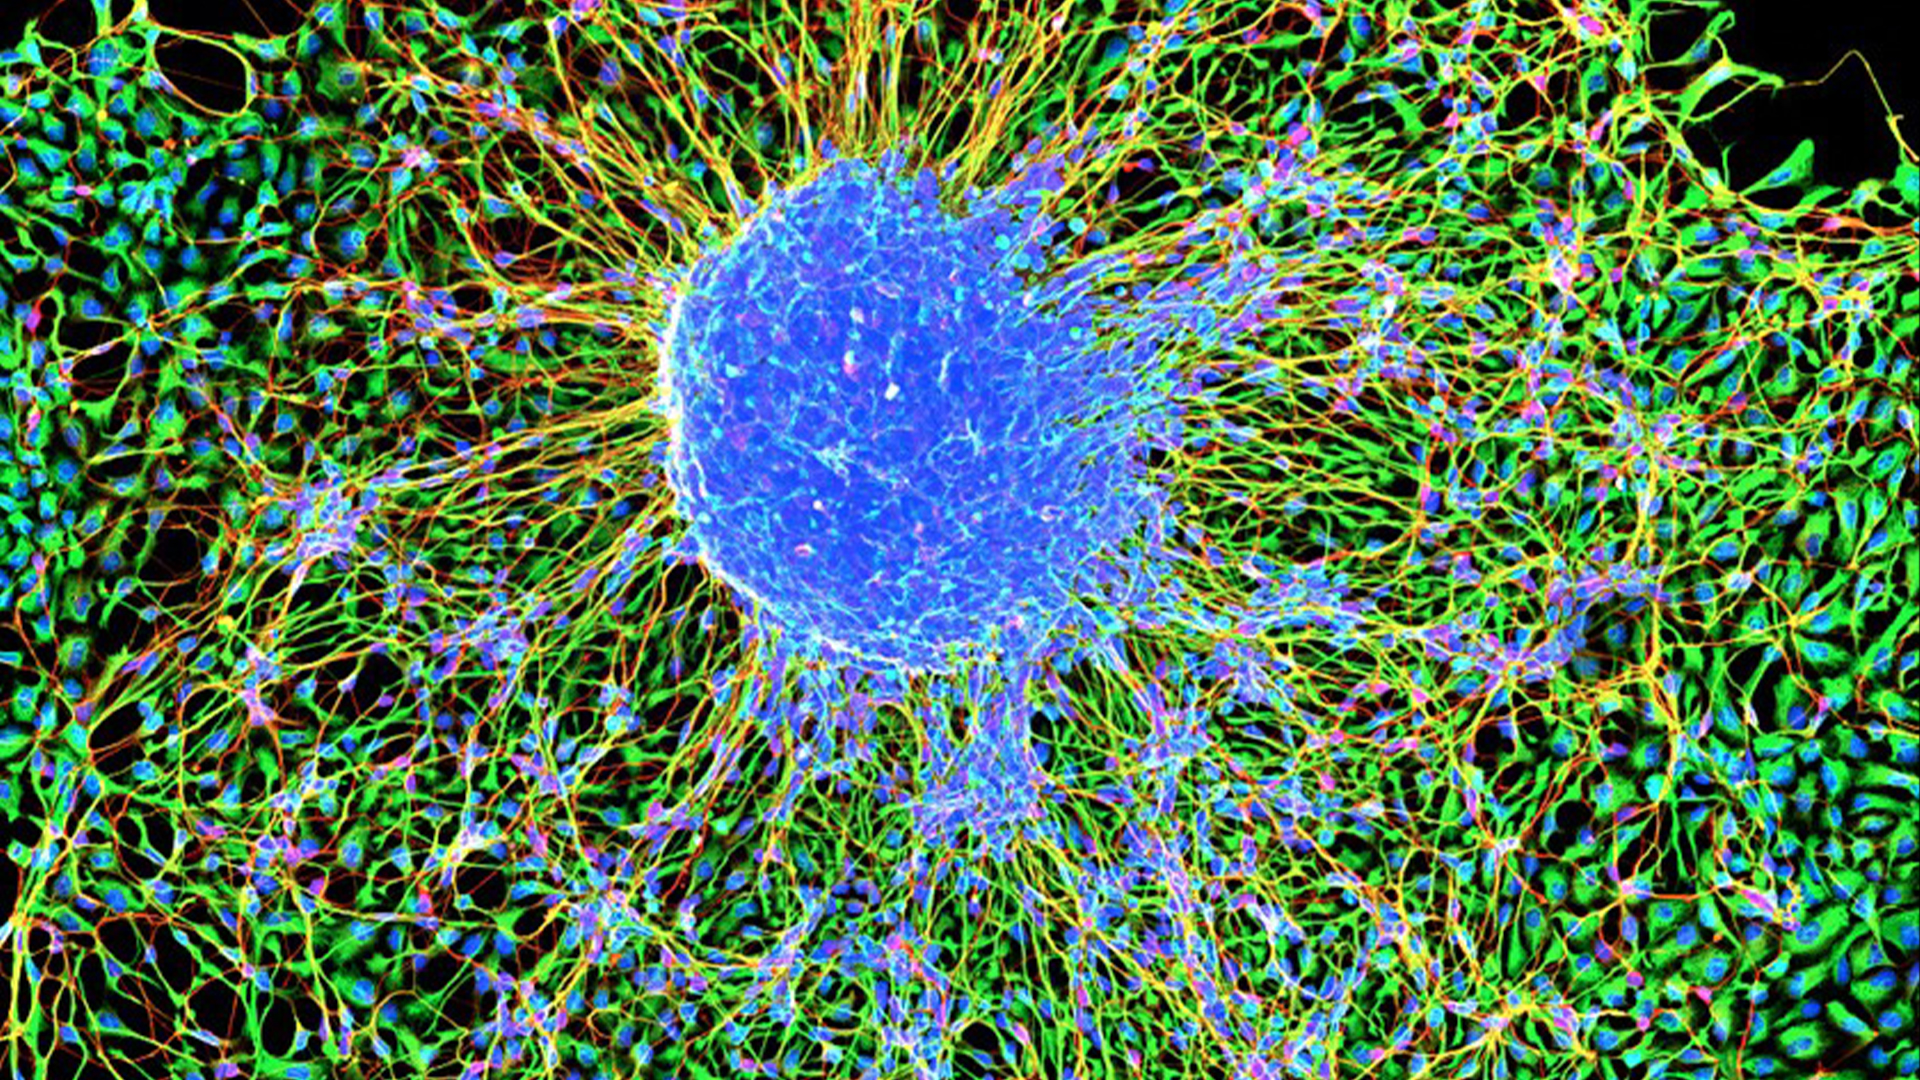 Scientists reveal the hidden math that governs how neurons cluster in the brain